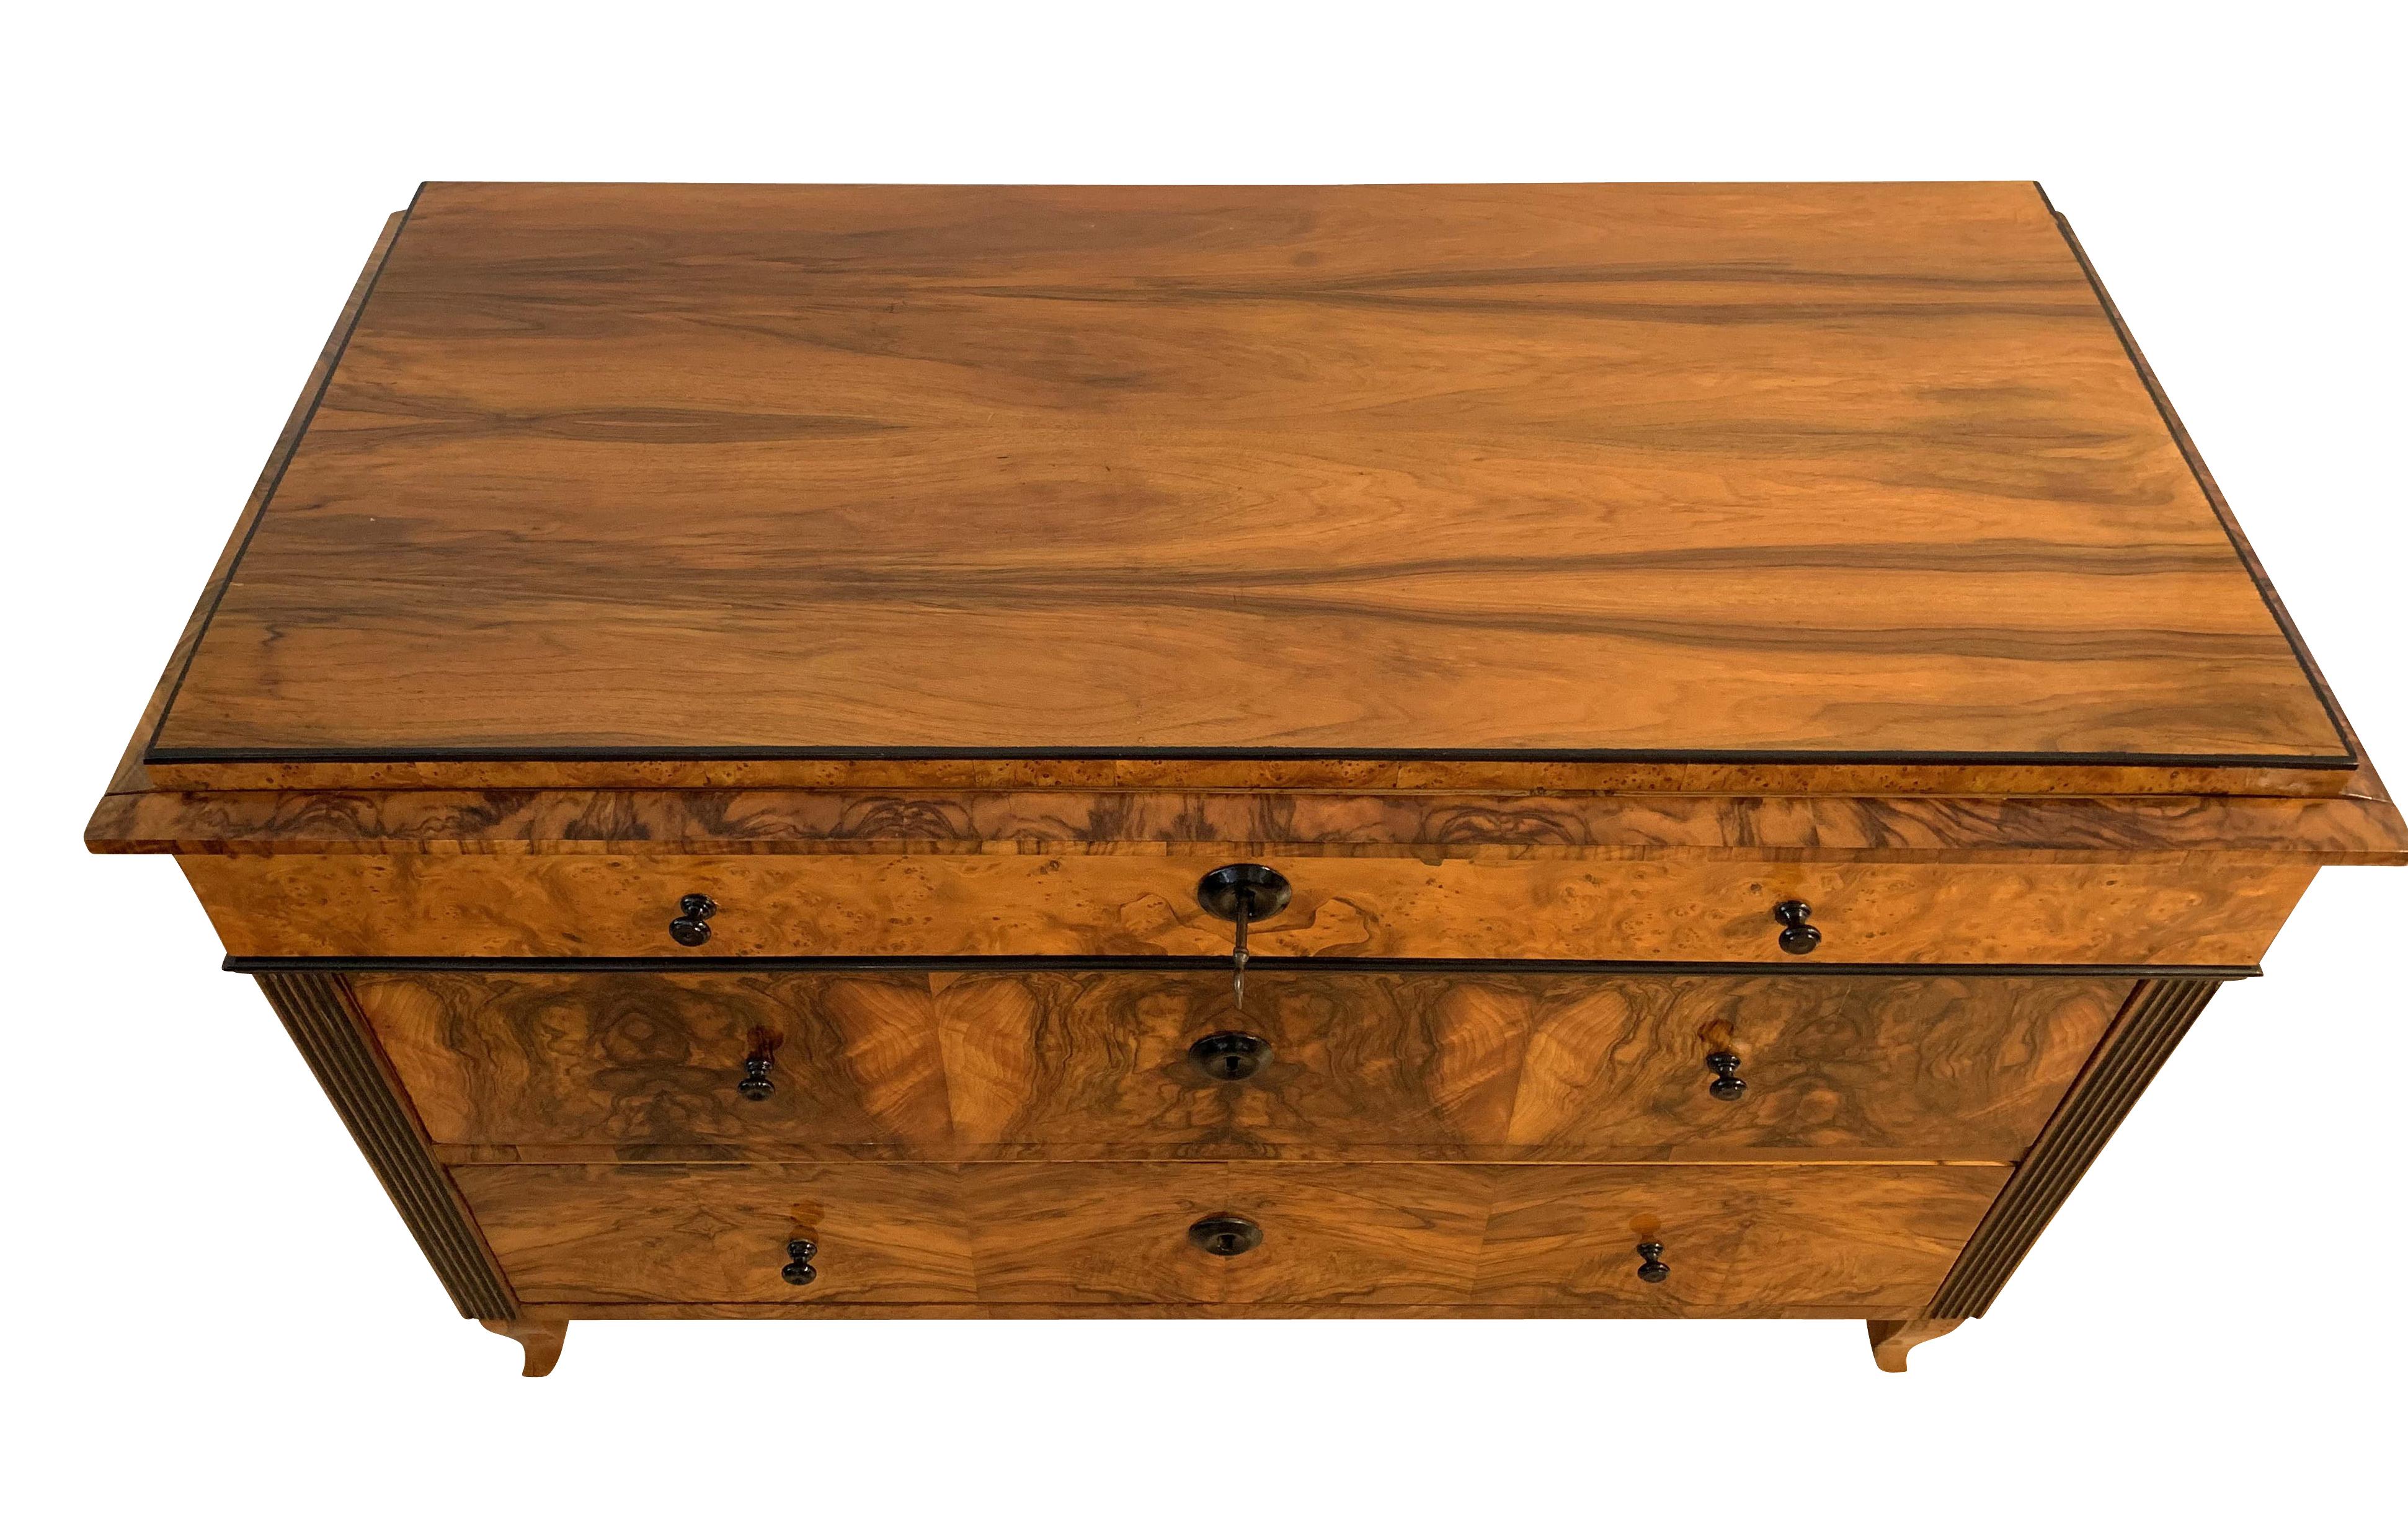 Wonderful neoclassical Biedermeier Commode / Chest of 3 Drawers from Austria around 1820.

Walnut and Ash Burl Veneered, French polish, partly ebonized.

Cannelured and inside ebonized Pilaster Strips. Top drawer connected with front of the cornice.